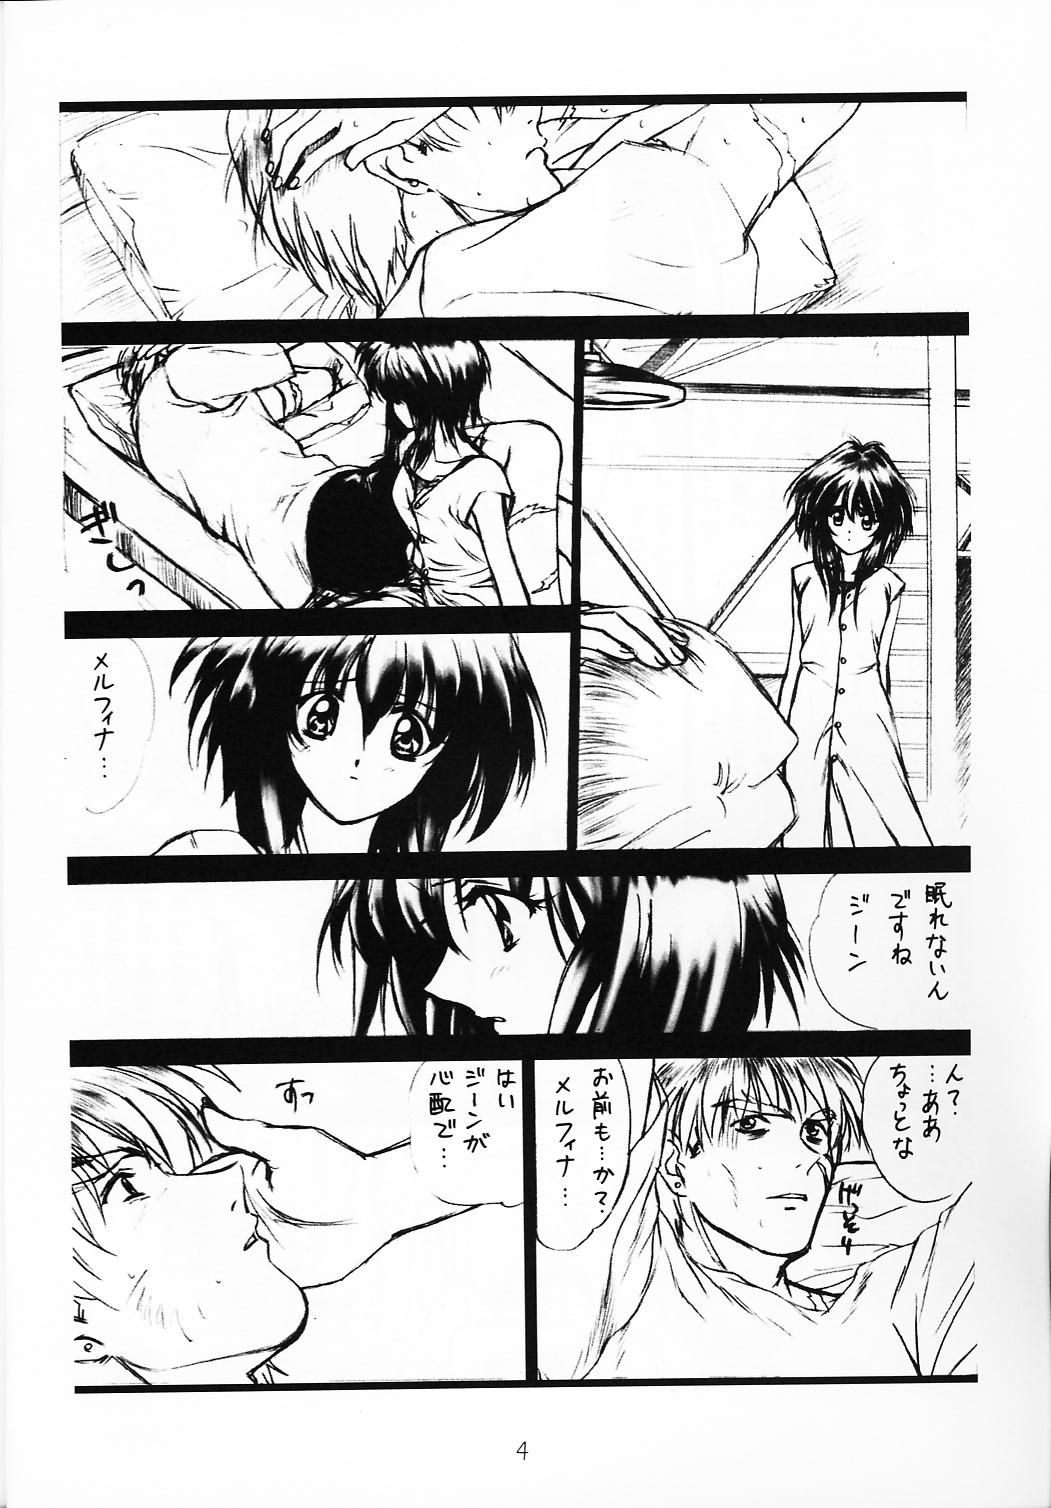 Two voguish I OUTLAW STAR - Outlaw star Olderwoman - Page 3